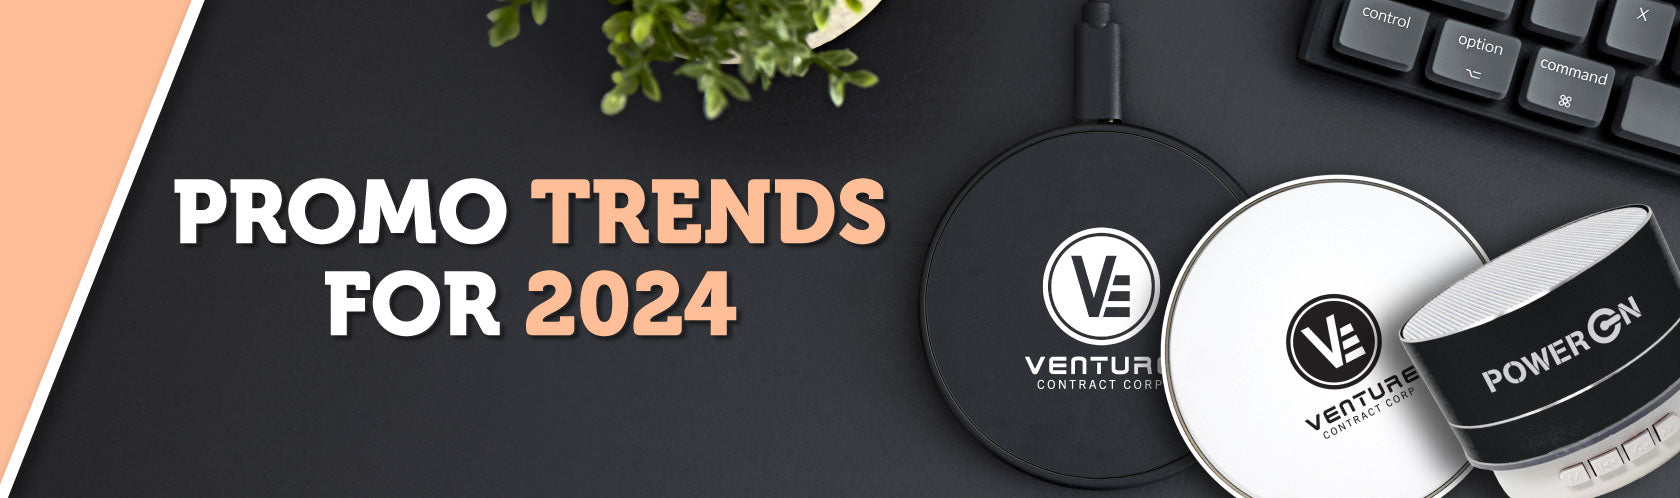 Promo Trends for 2024